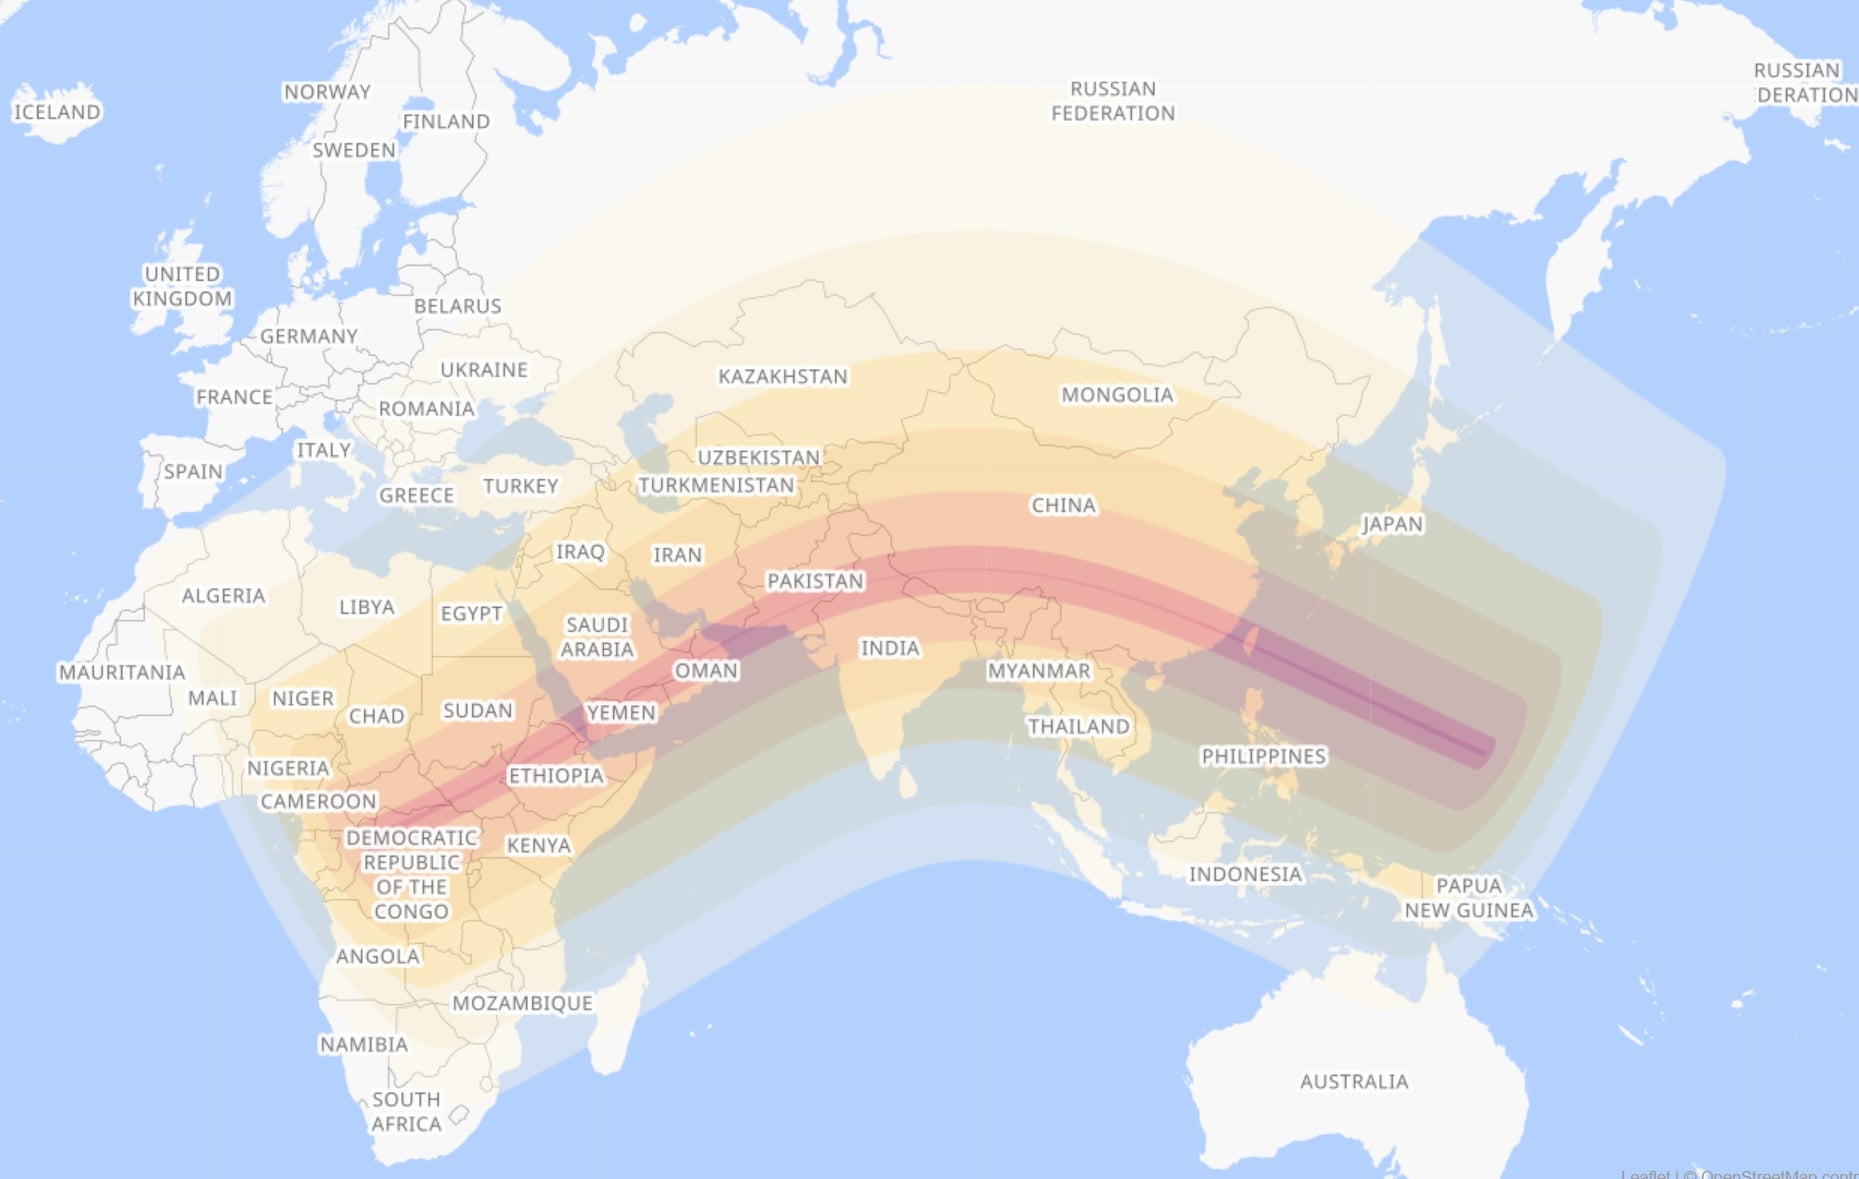 The path of the annular solar eclipse on 21 June 2020